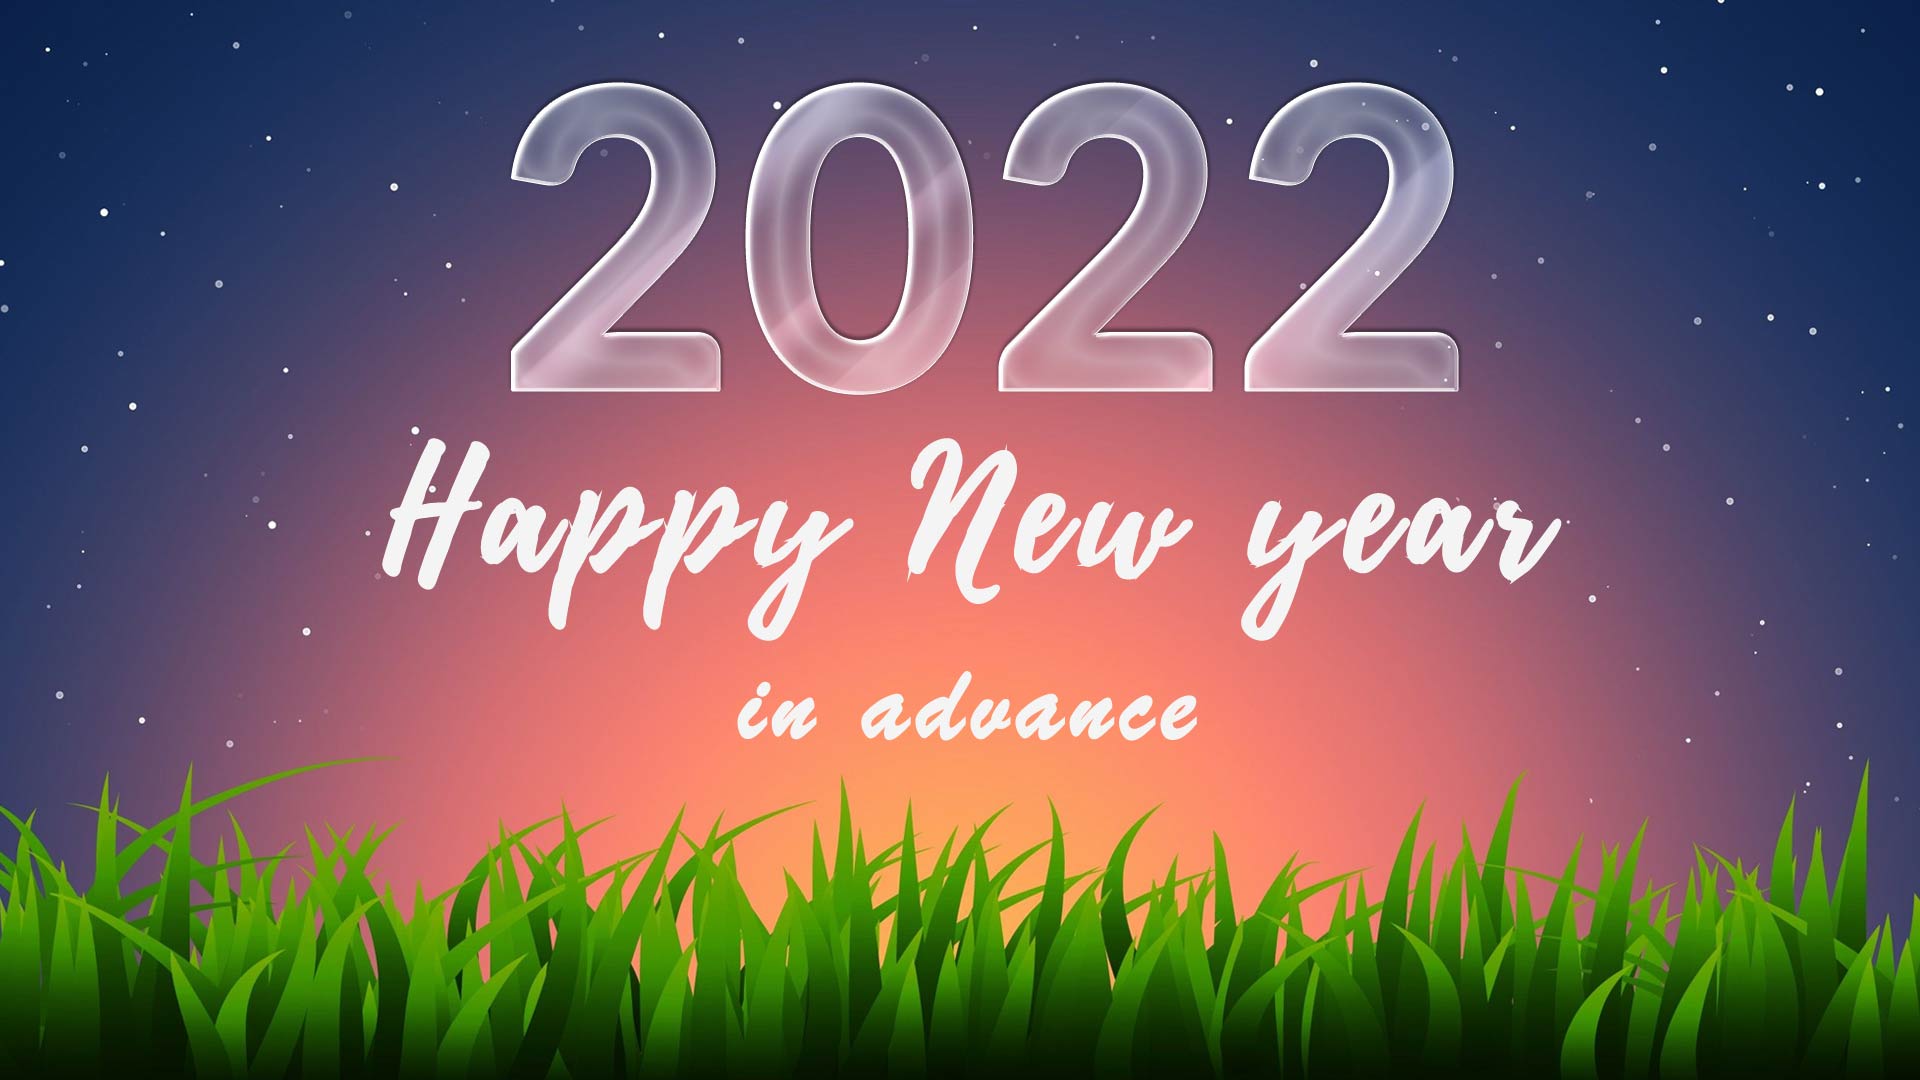 new year 2022 messages in advance